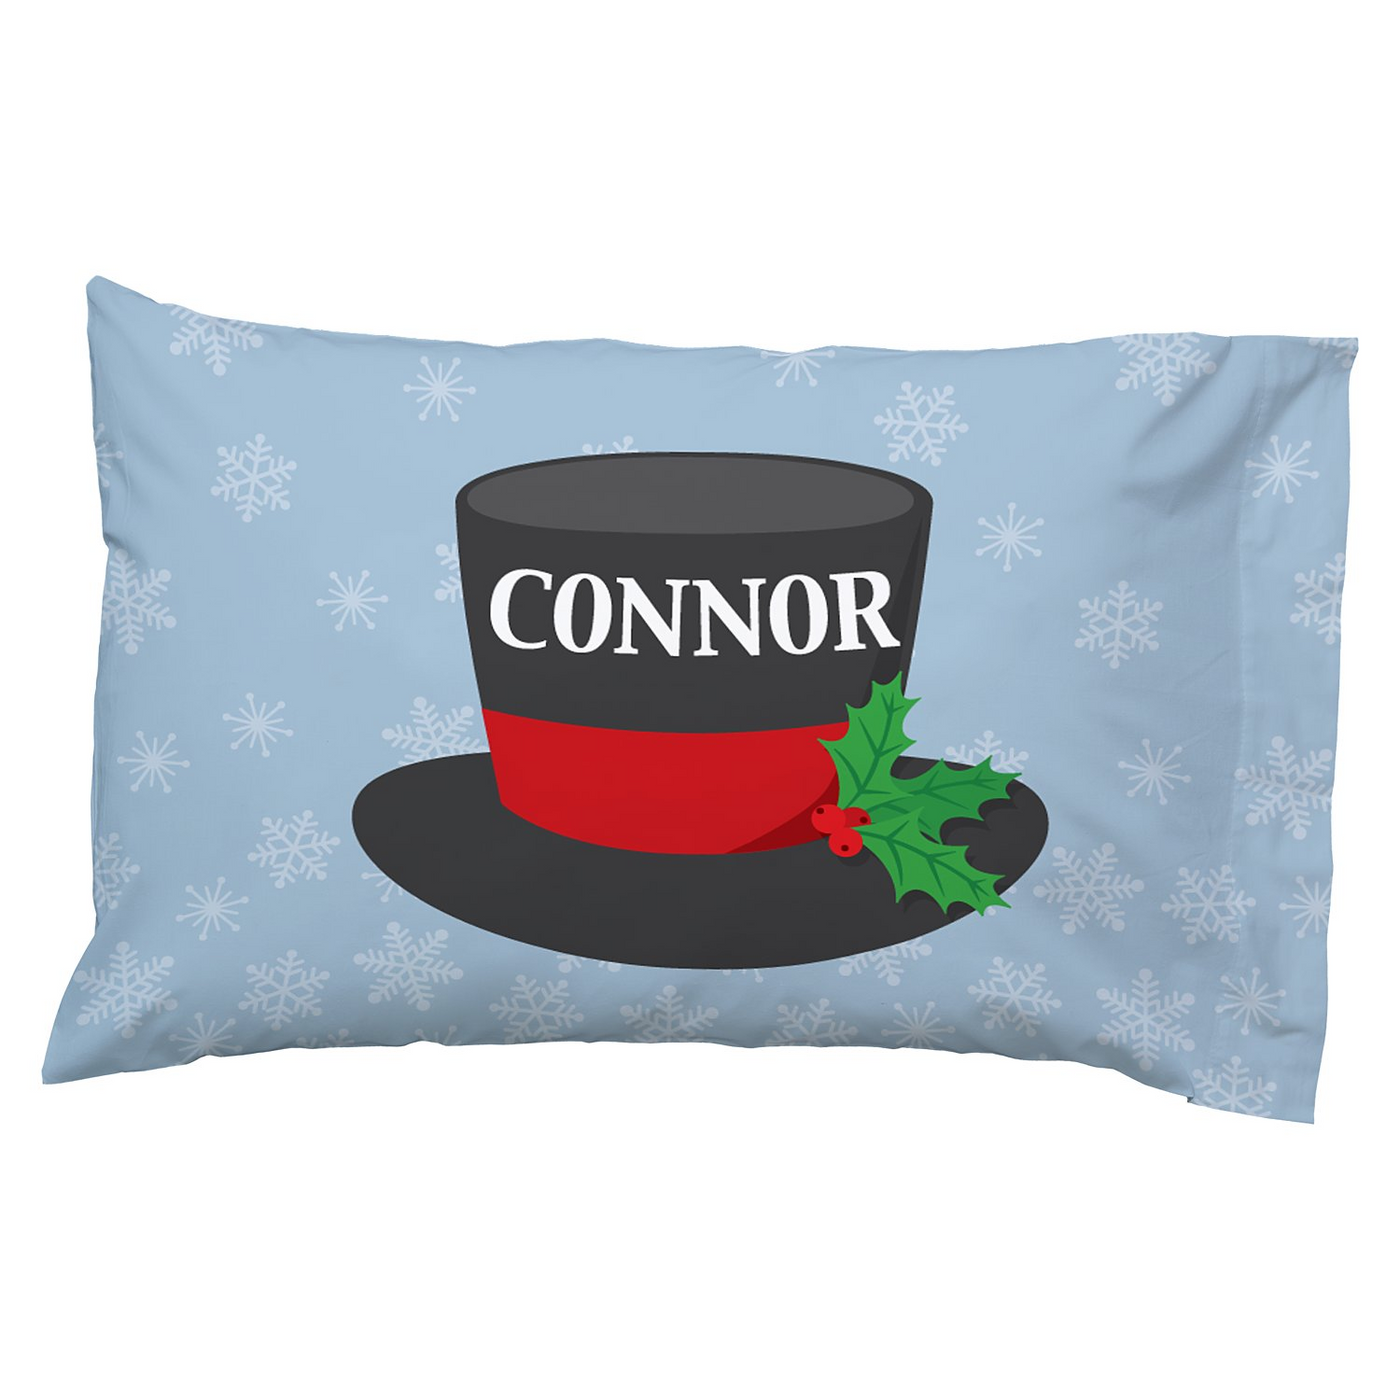 My Favorite Character Christmas Pillow